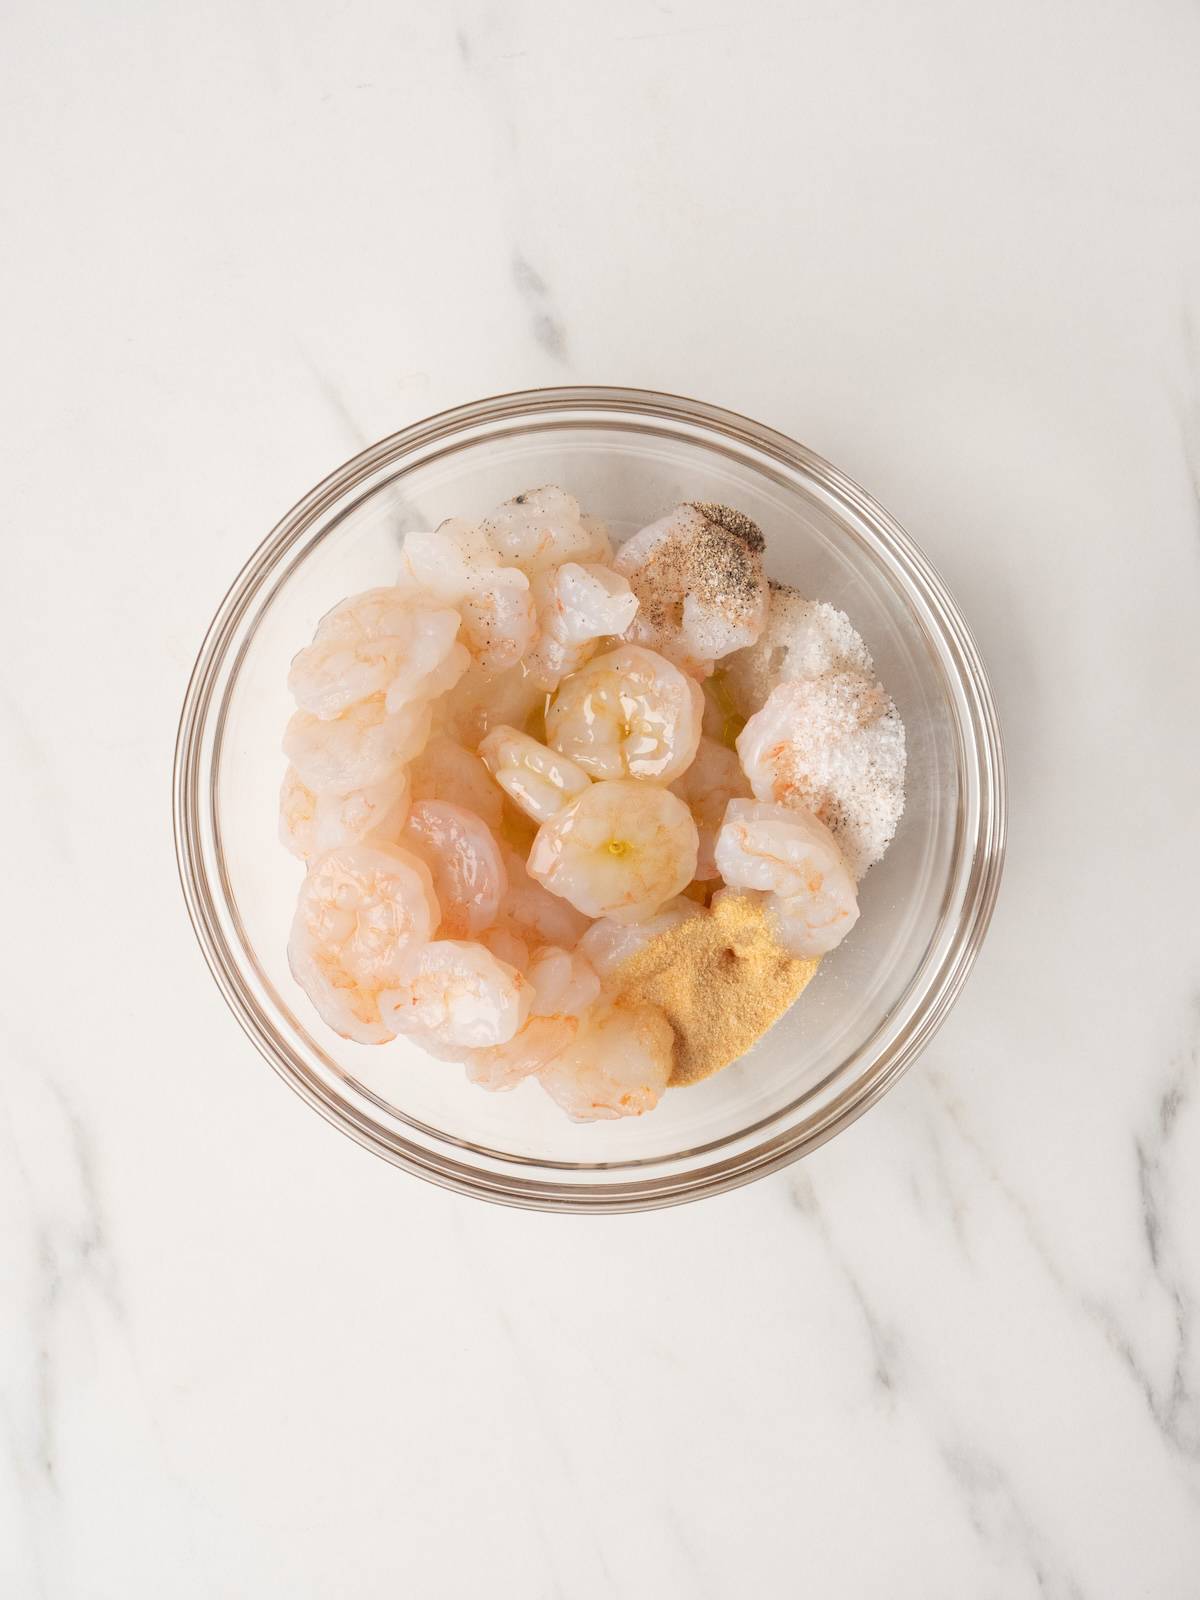 A small glass bowl with shrimp tossed with oil, garlic powder, salt and pepper.